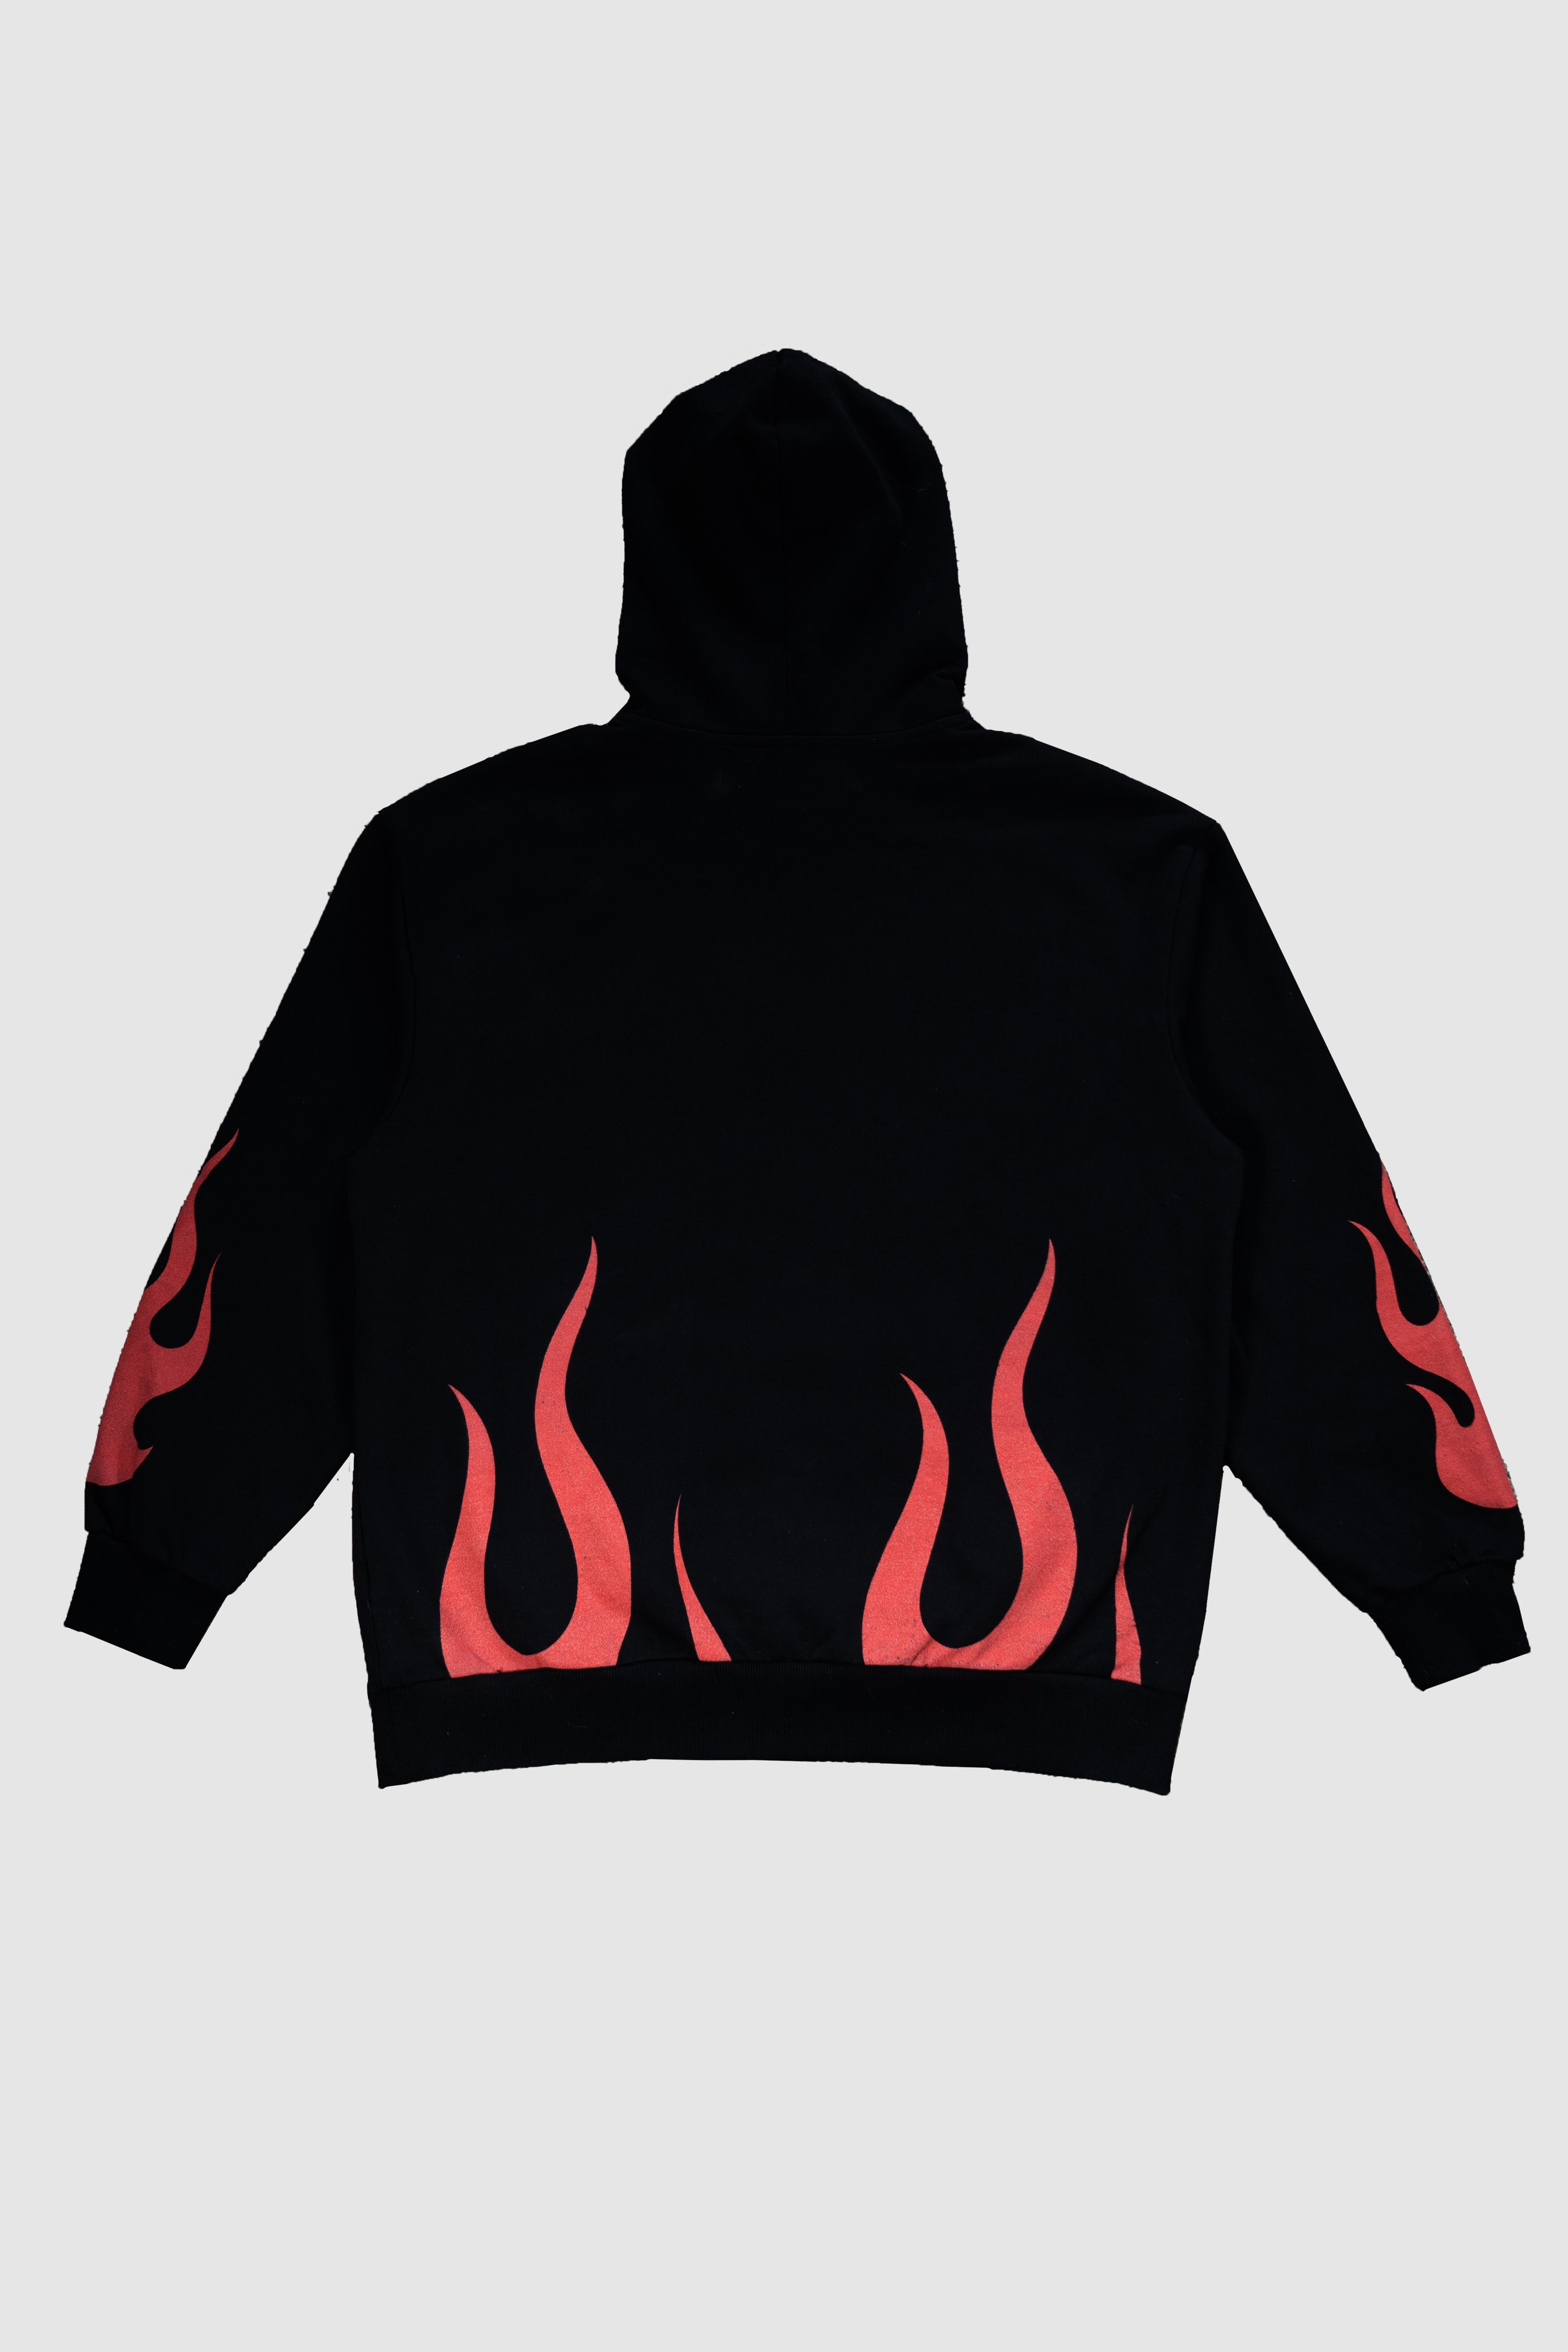 6thNBRHD PULLOVER "FIRST PLACE" BLACK